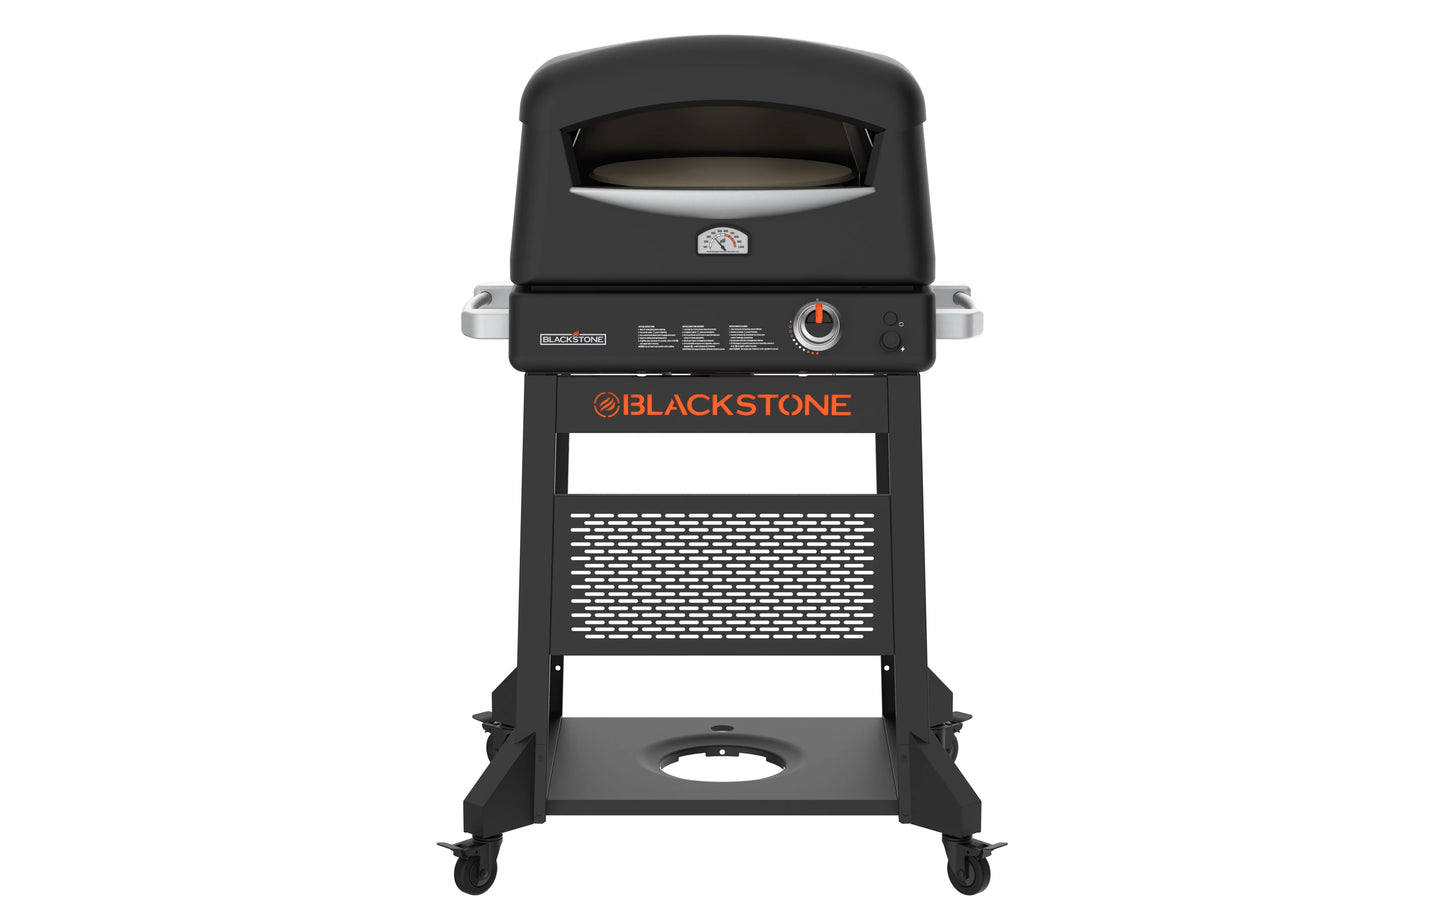 Blackstone Propane Pizza Oven with 16" Rotating Cordierite Stone and Mobile Stand